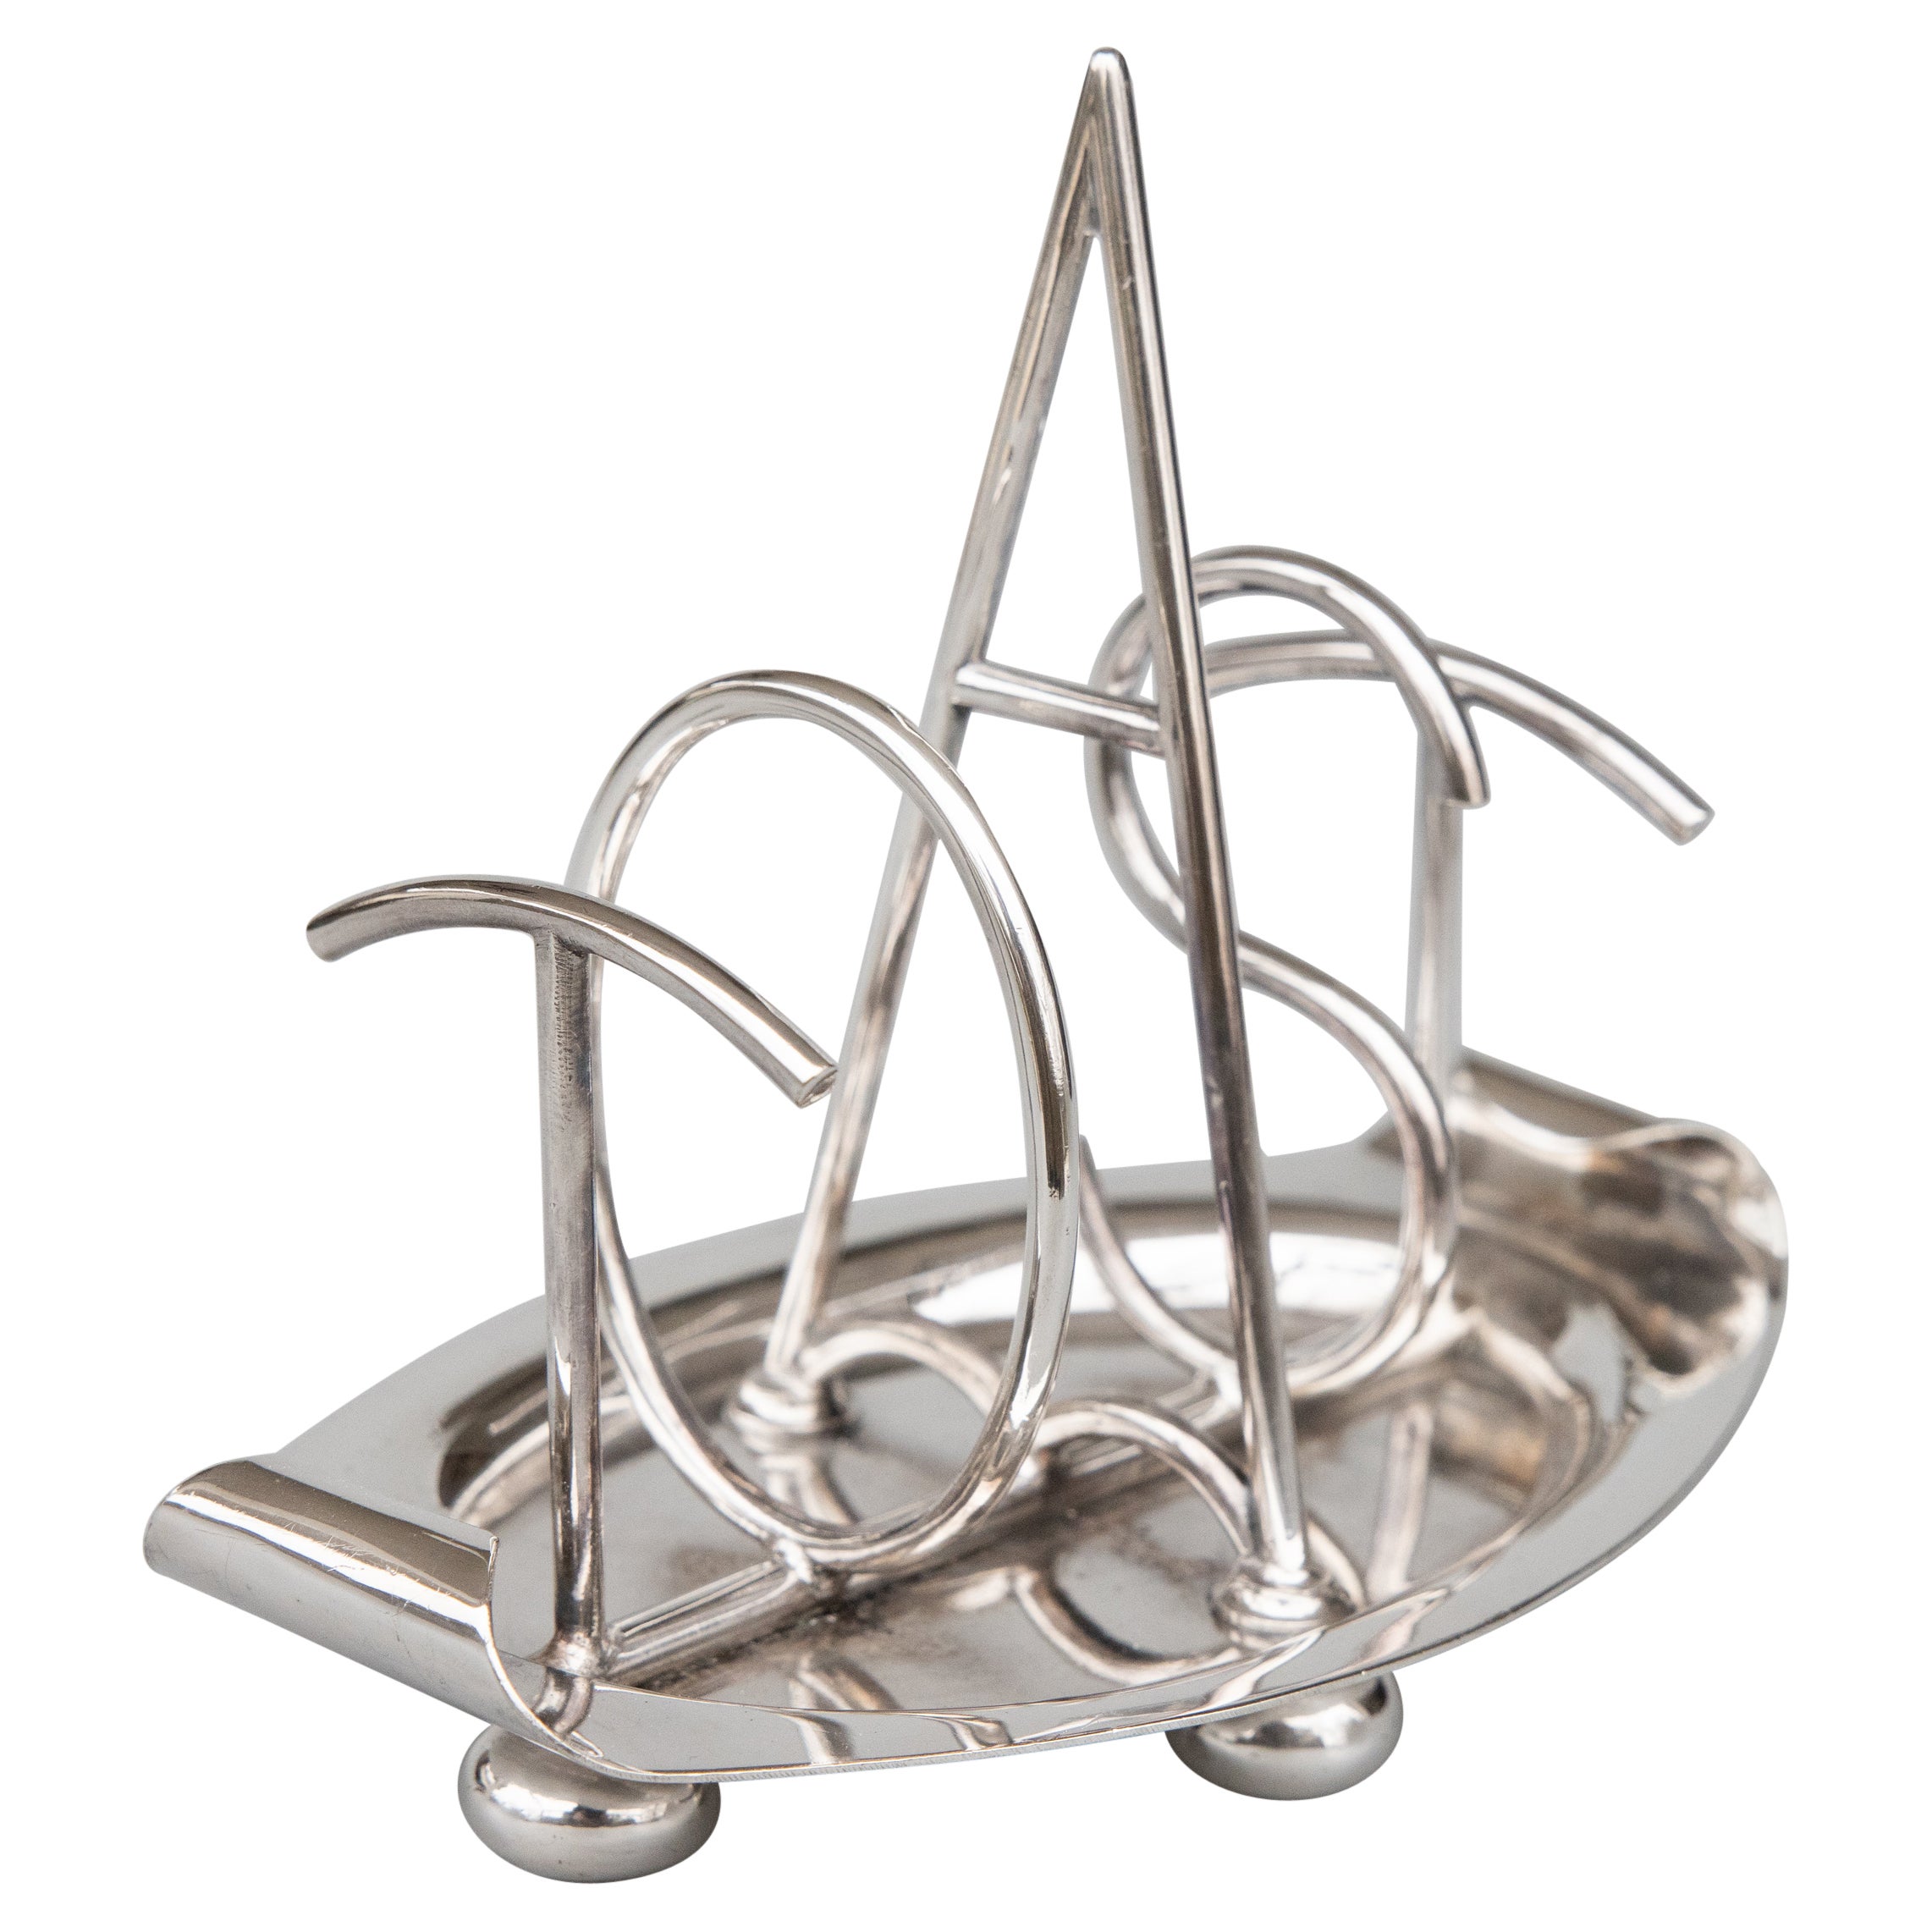 Antique English Walker & Hall Sheffield Silver Plate Toast Rack, Dated 1903 For Sale